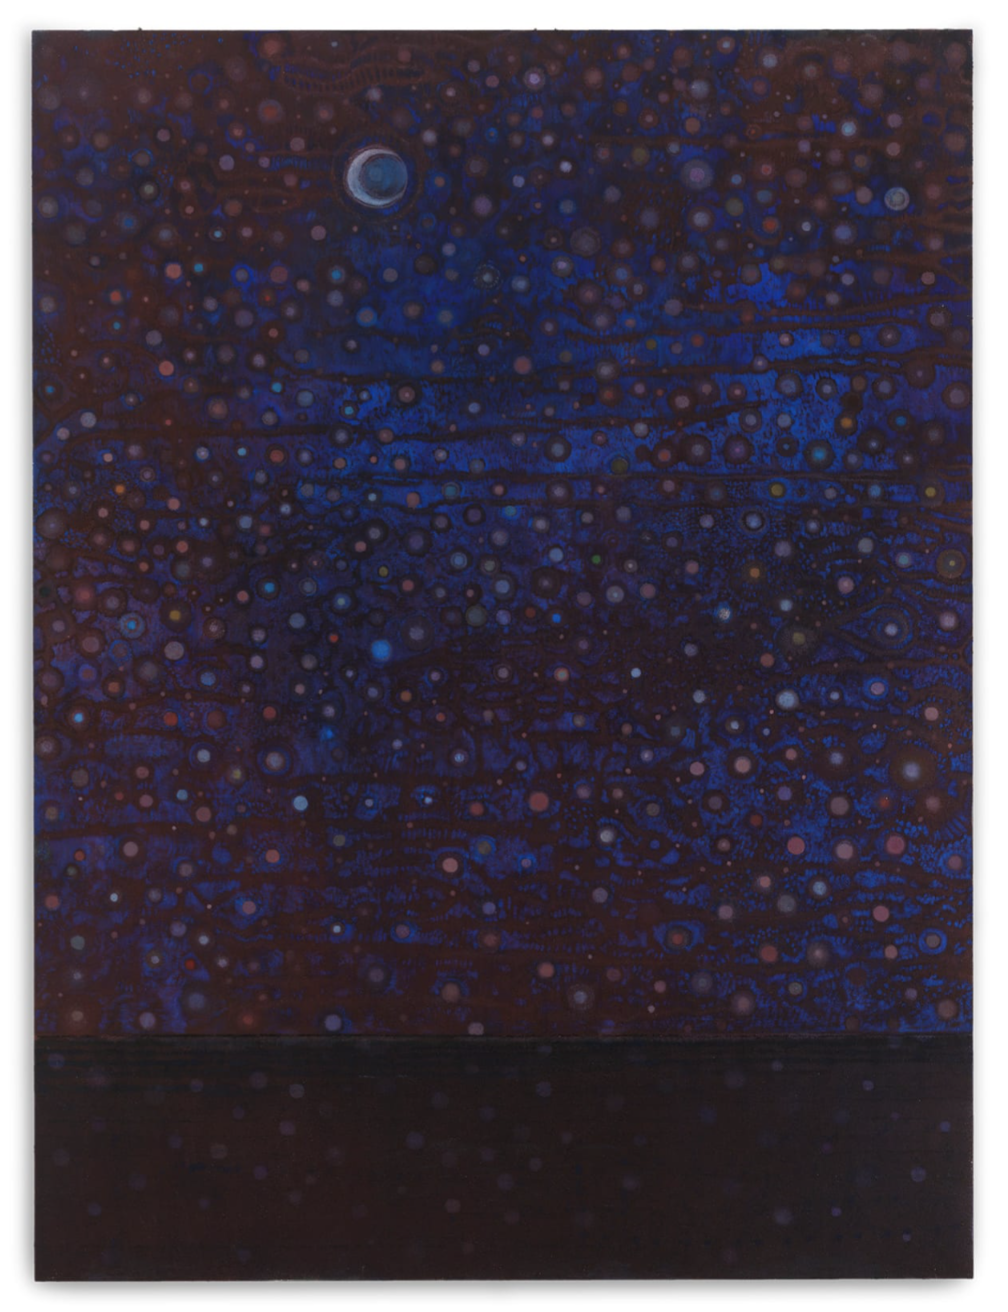    Star-sown sky , 2023    Oil and sand on canvas    244 x 183cm (96 x 72in)  